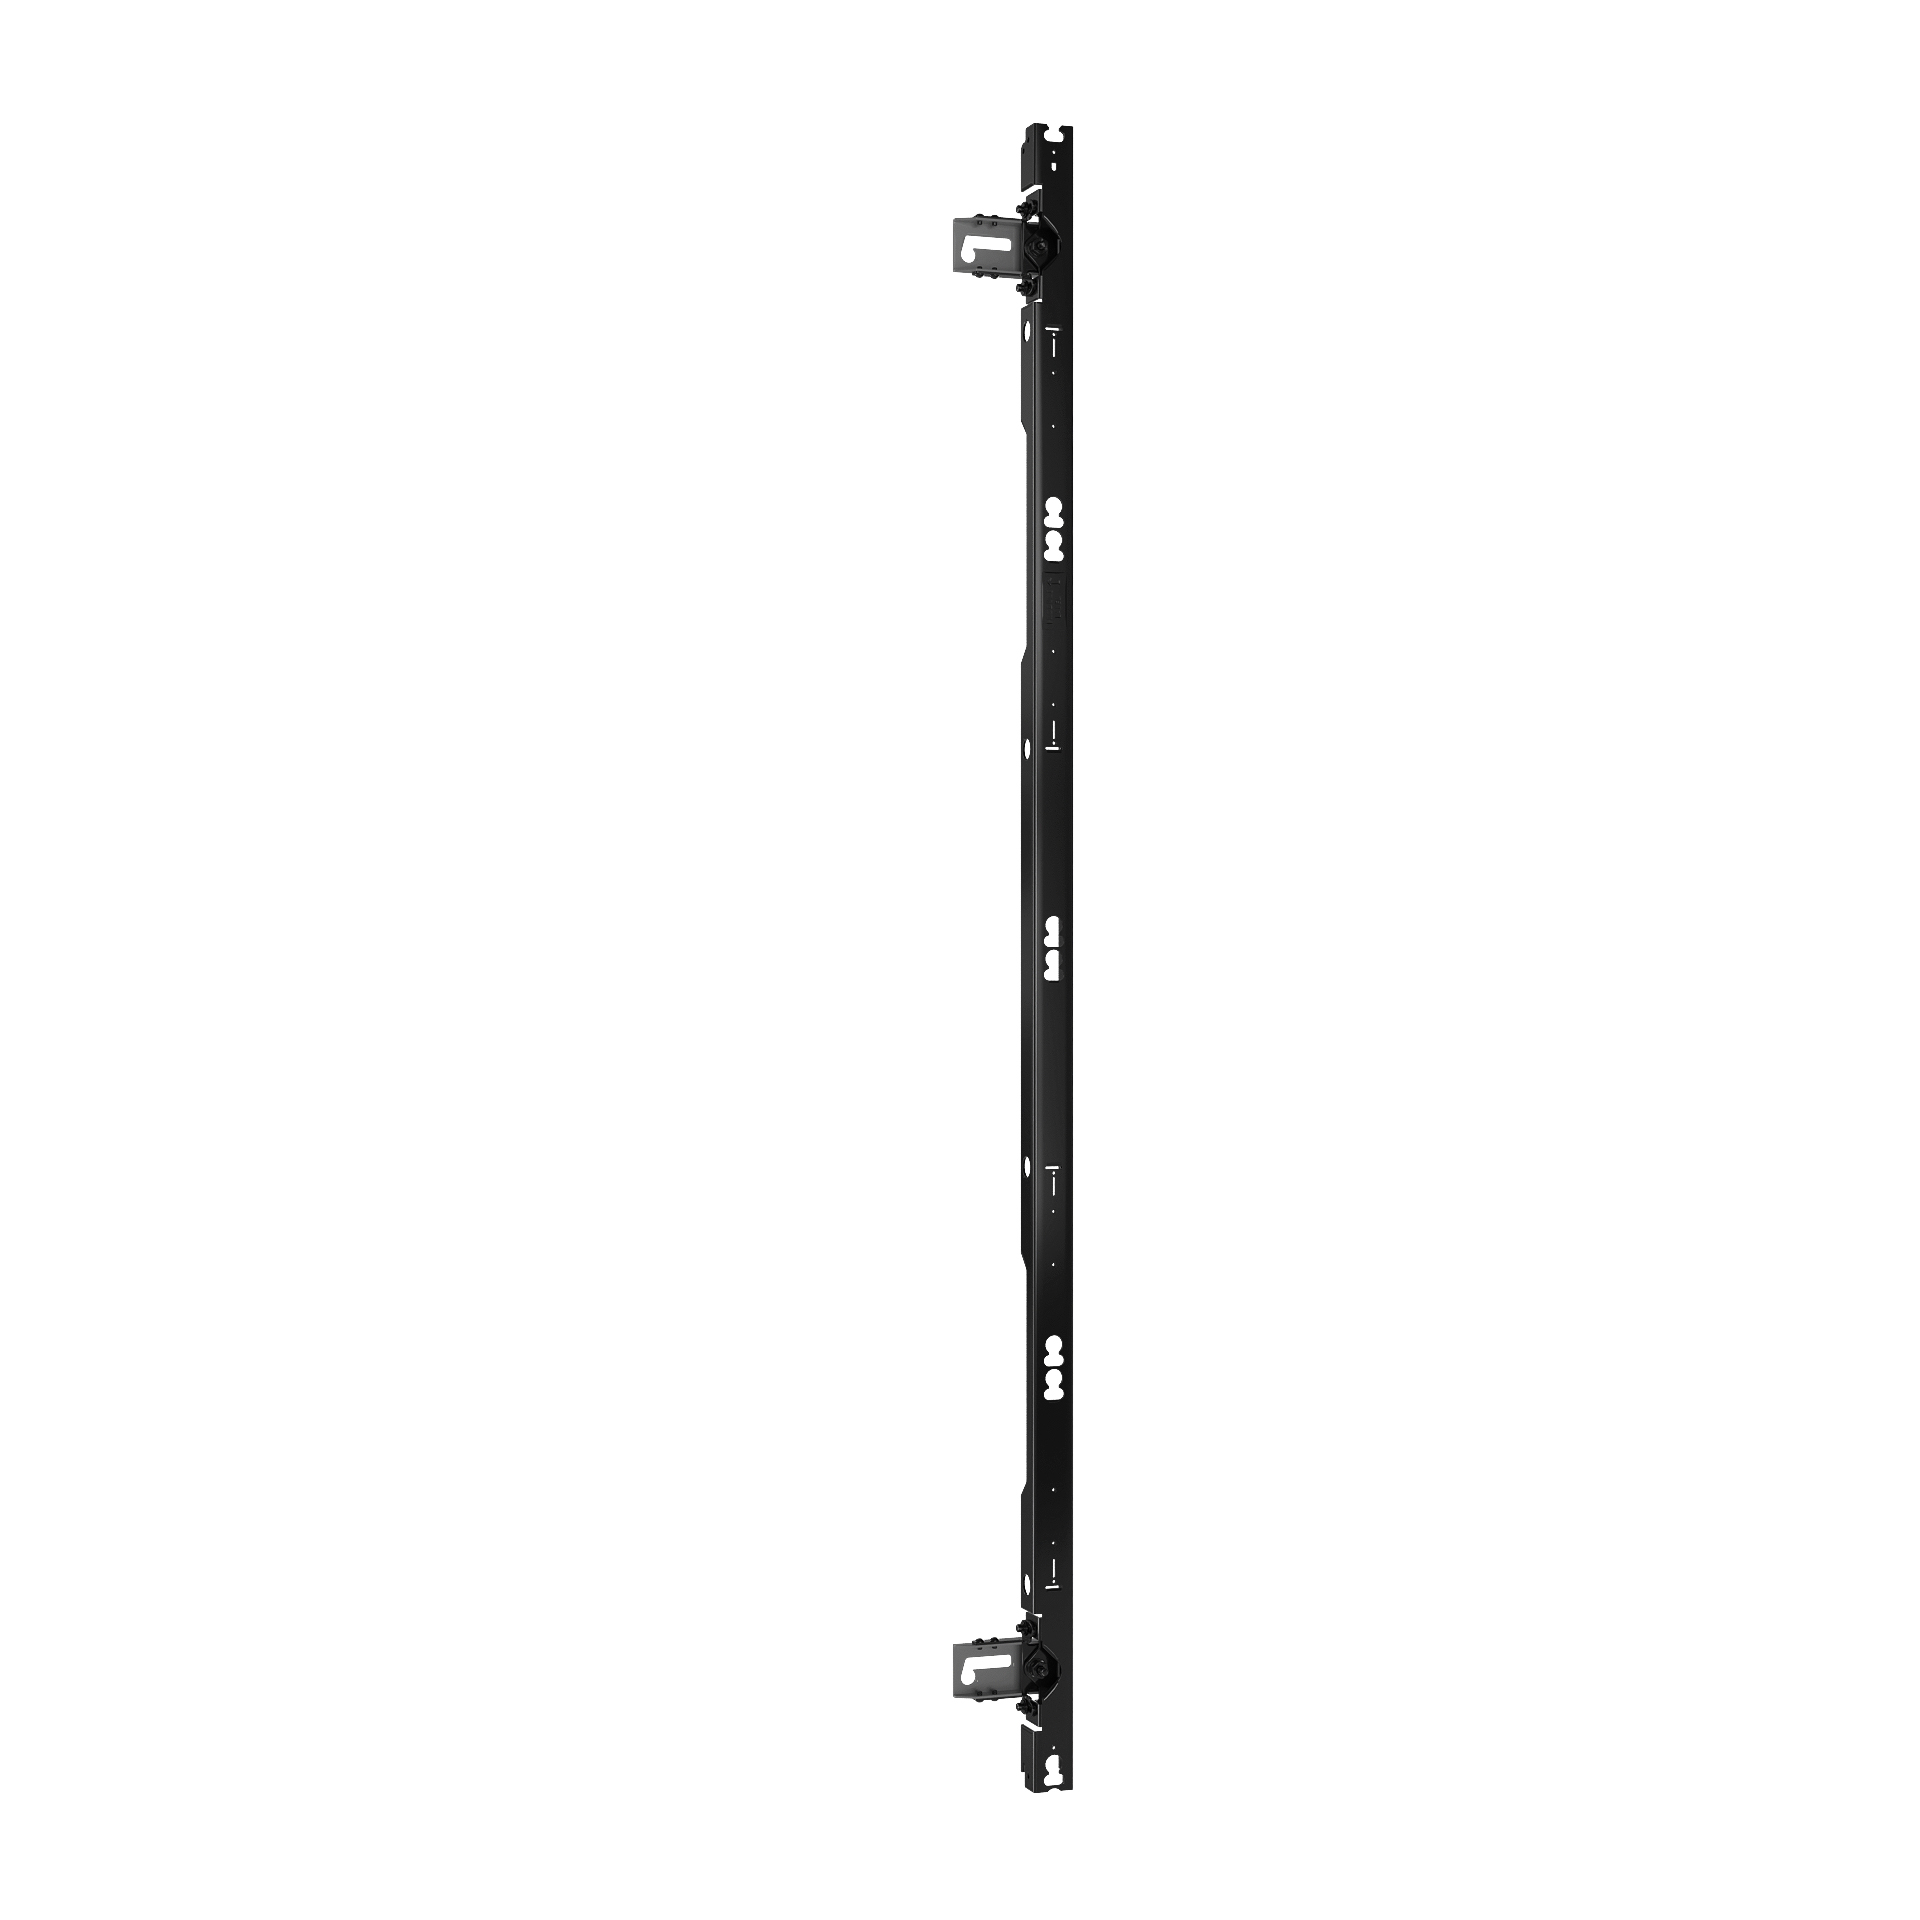 TILD1X5SO1-R Right dvLED Wall Mount for Sony Crystal LED C and B-Series, 5 Displays Tall